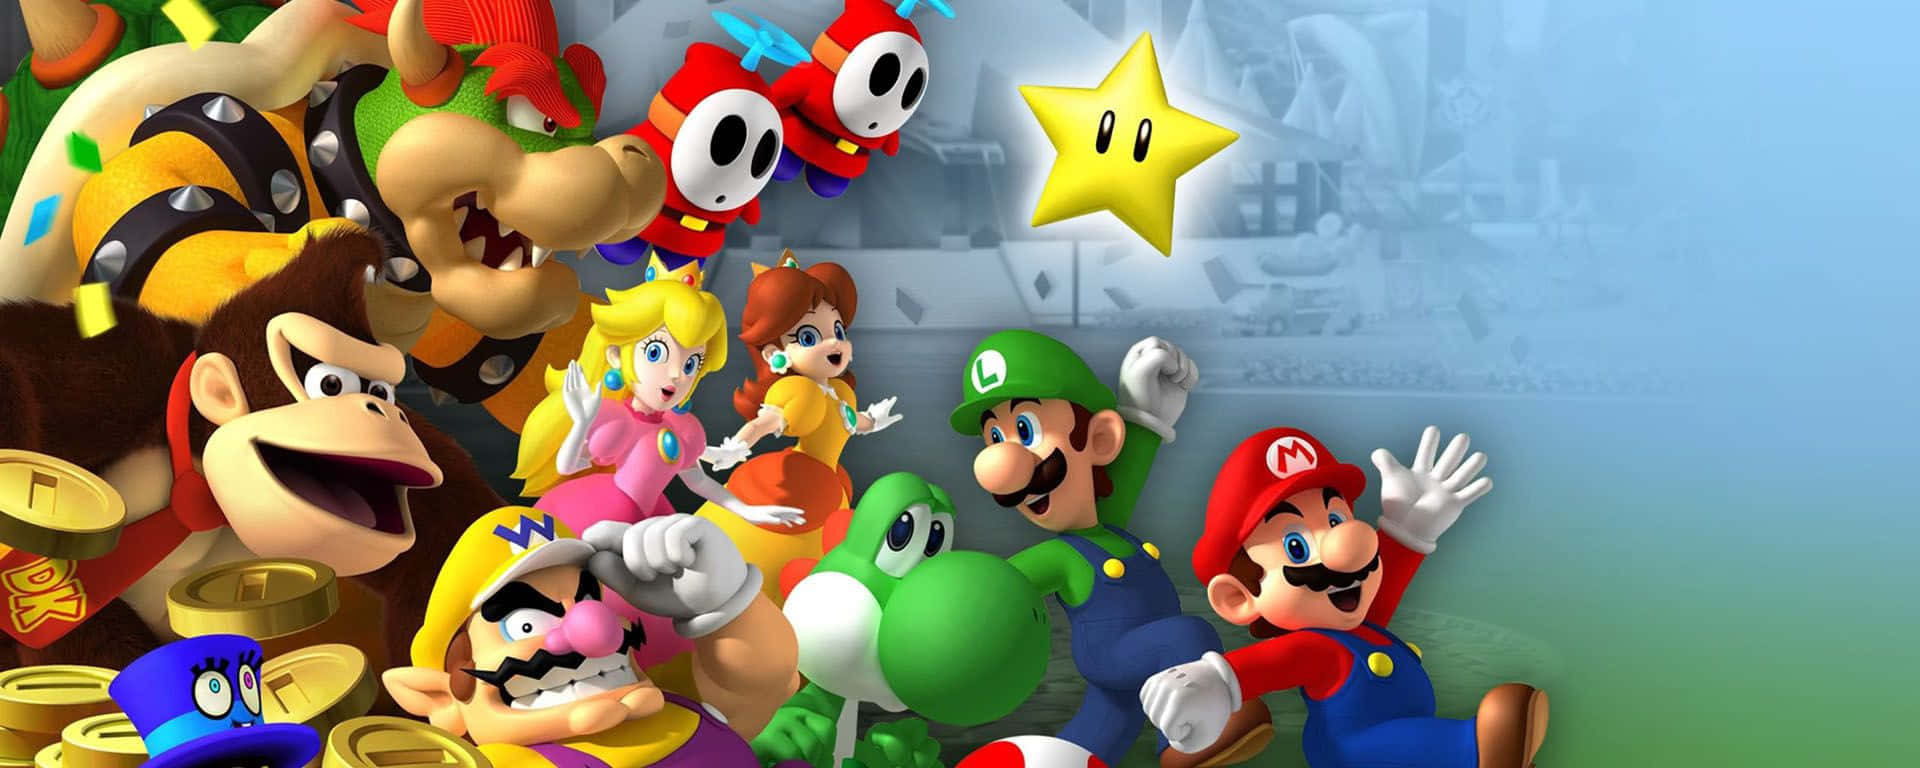 Exciting Mario Party Gameplay Action Wallpaper